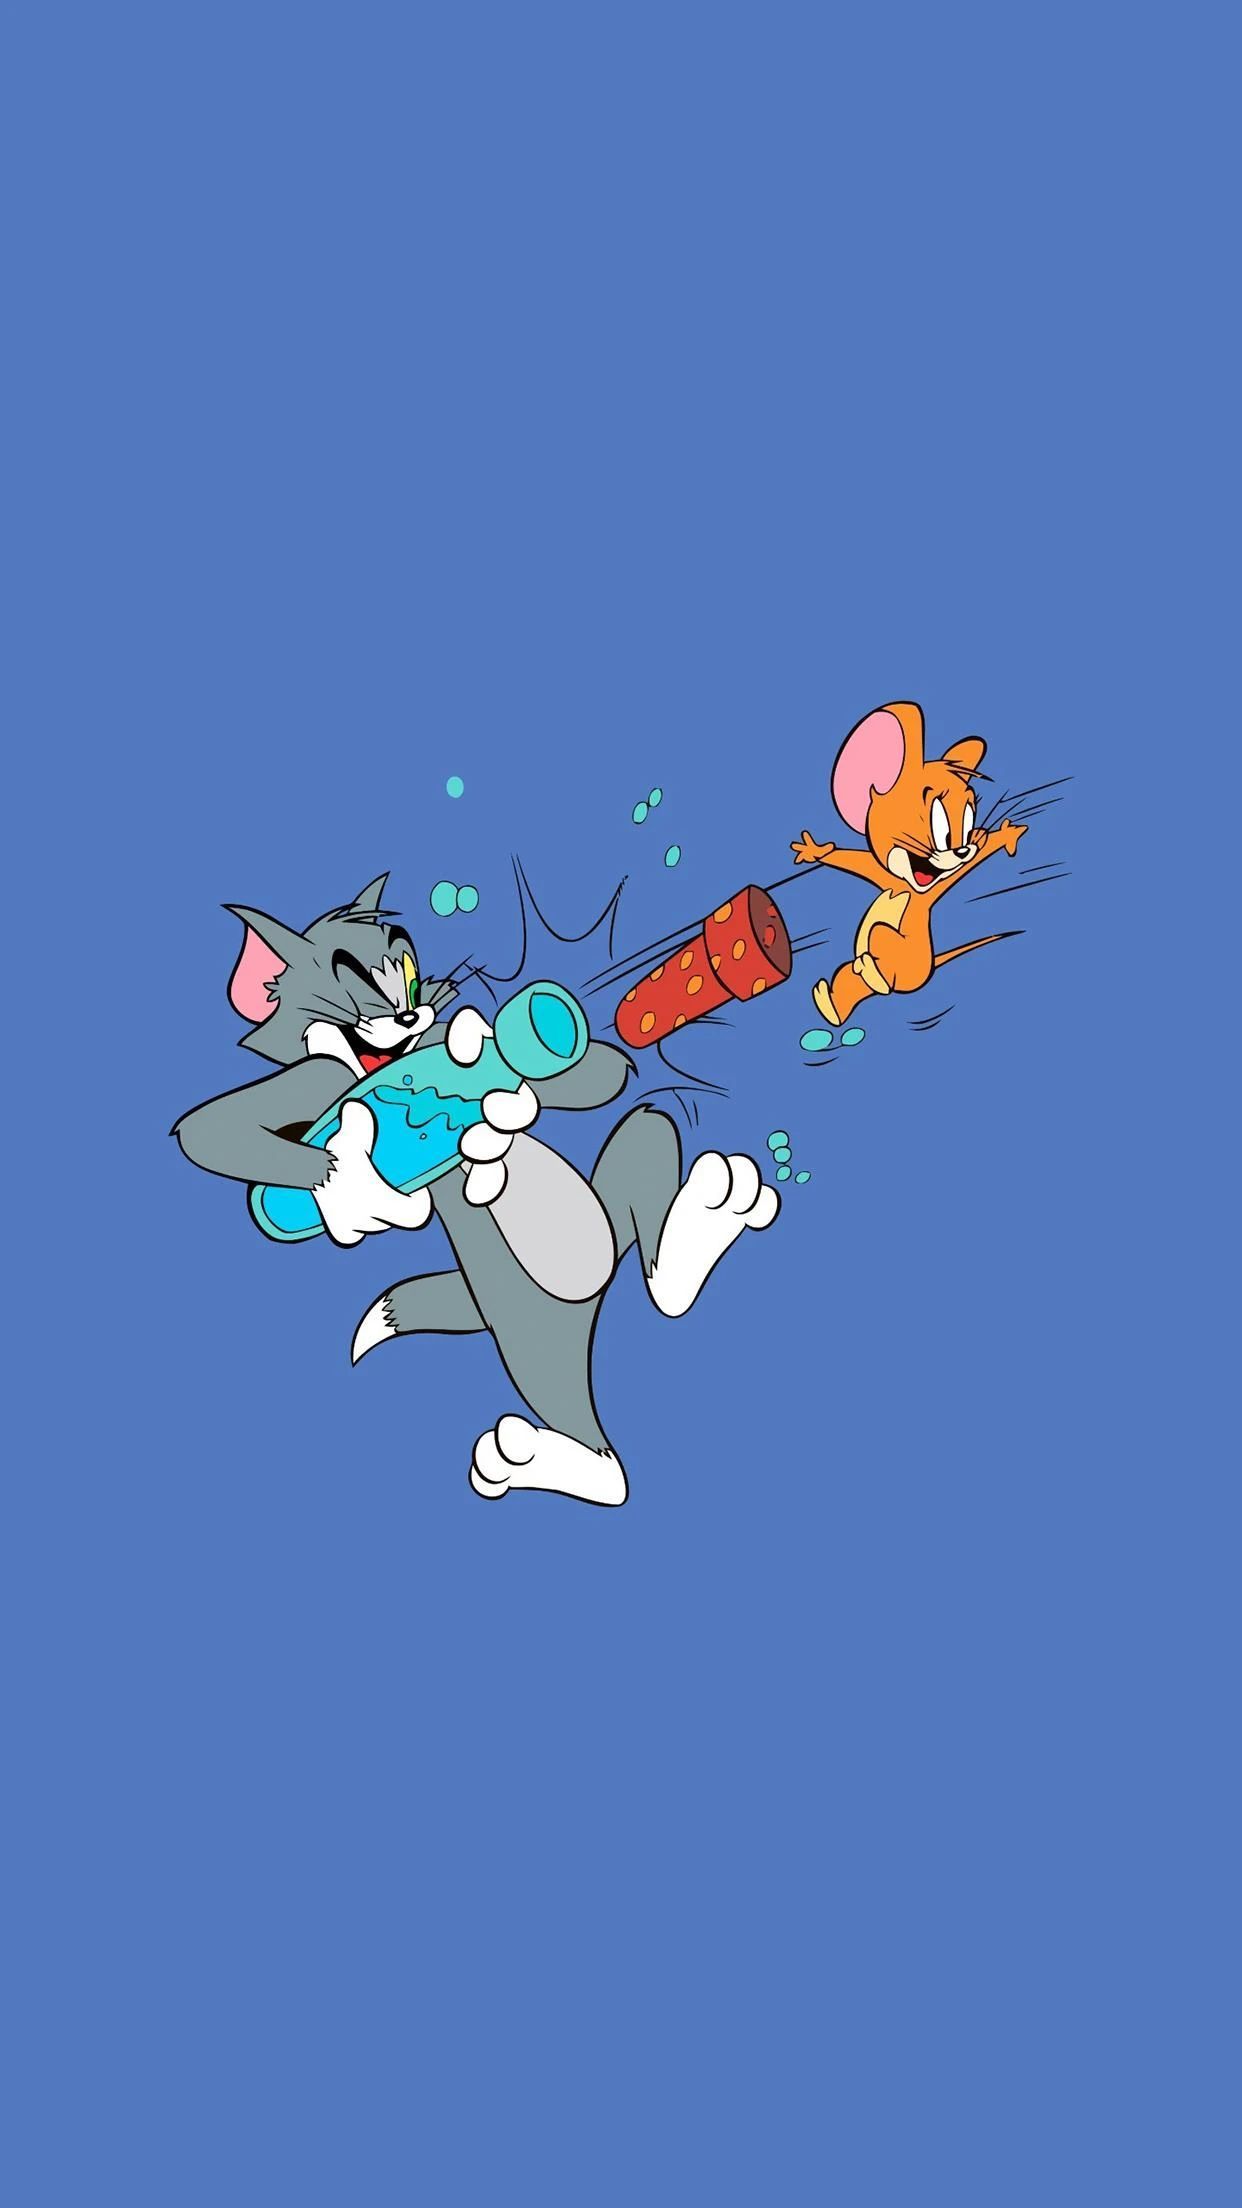 Phone Wallpaper to Commemorate Tom and Jerry's Animator Gene Deitch. Tom and jerry wallpaper, Tom and jerry photo, Cute cartoon wallpaper